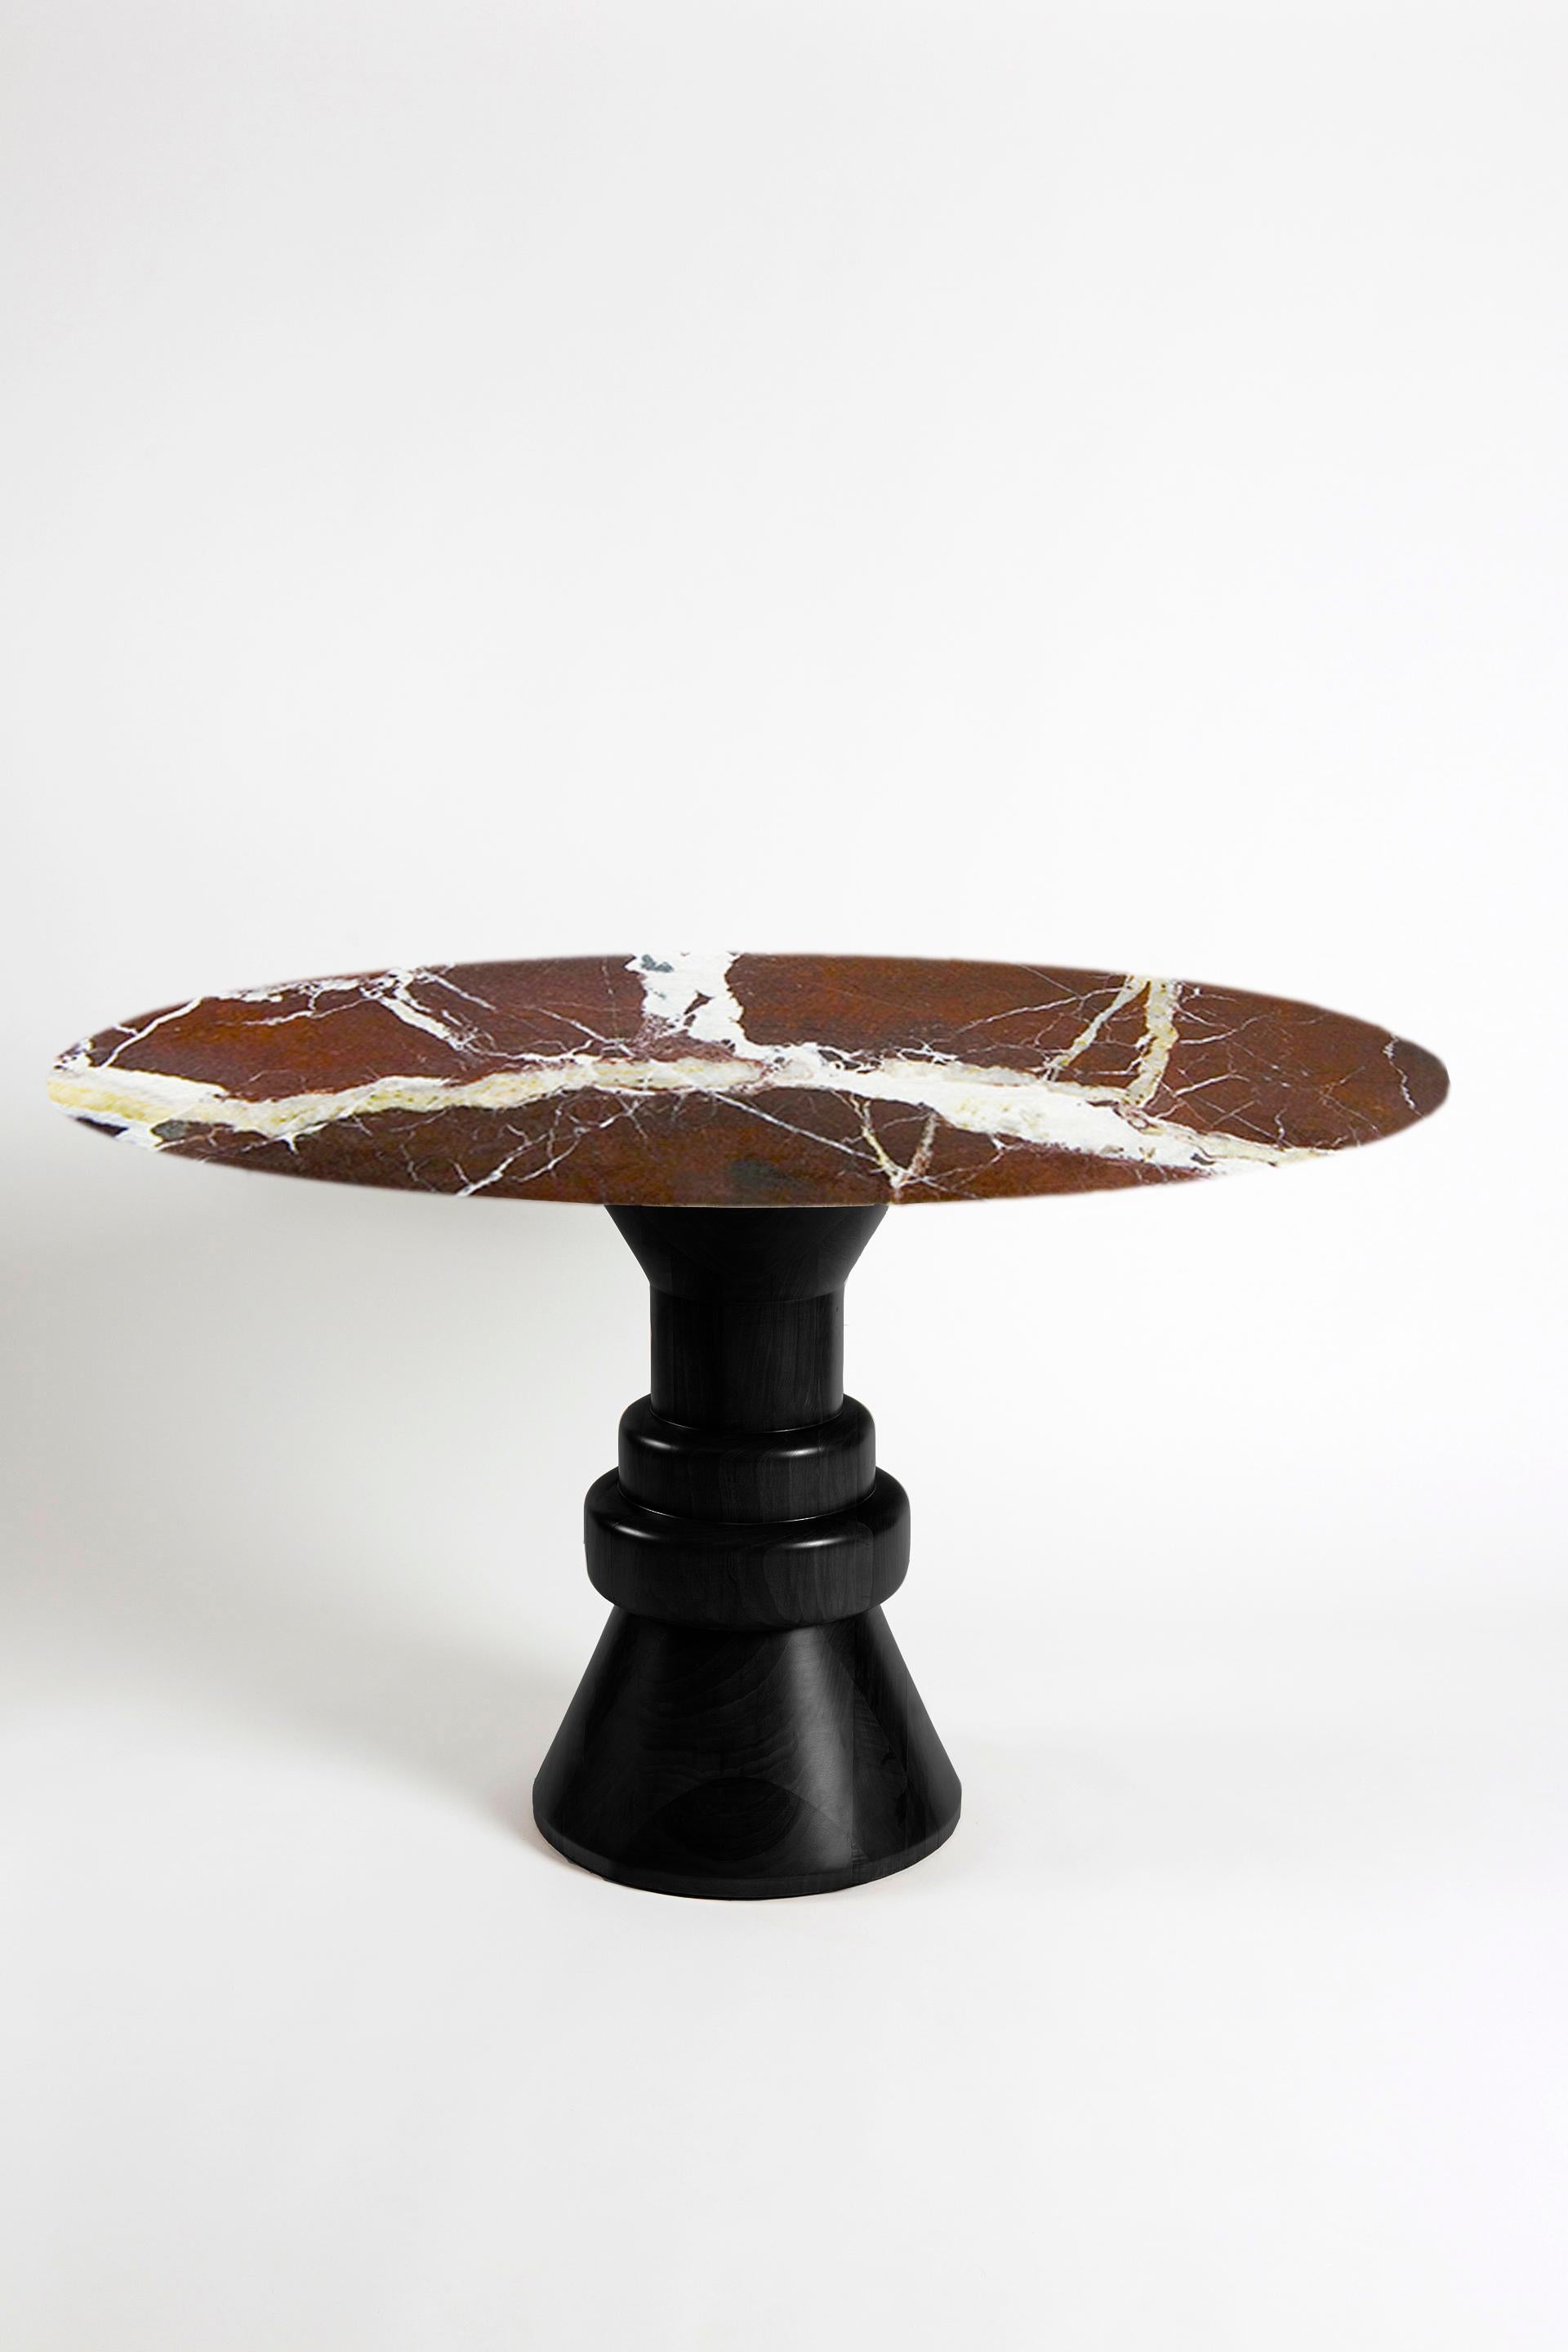 21st Century Cream Marble Round Dining Table with Sculptural Wooden Base For Sale 4